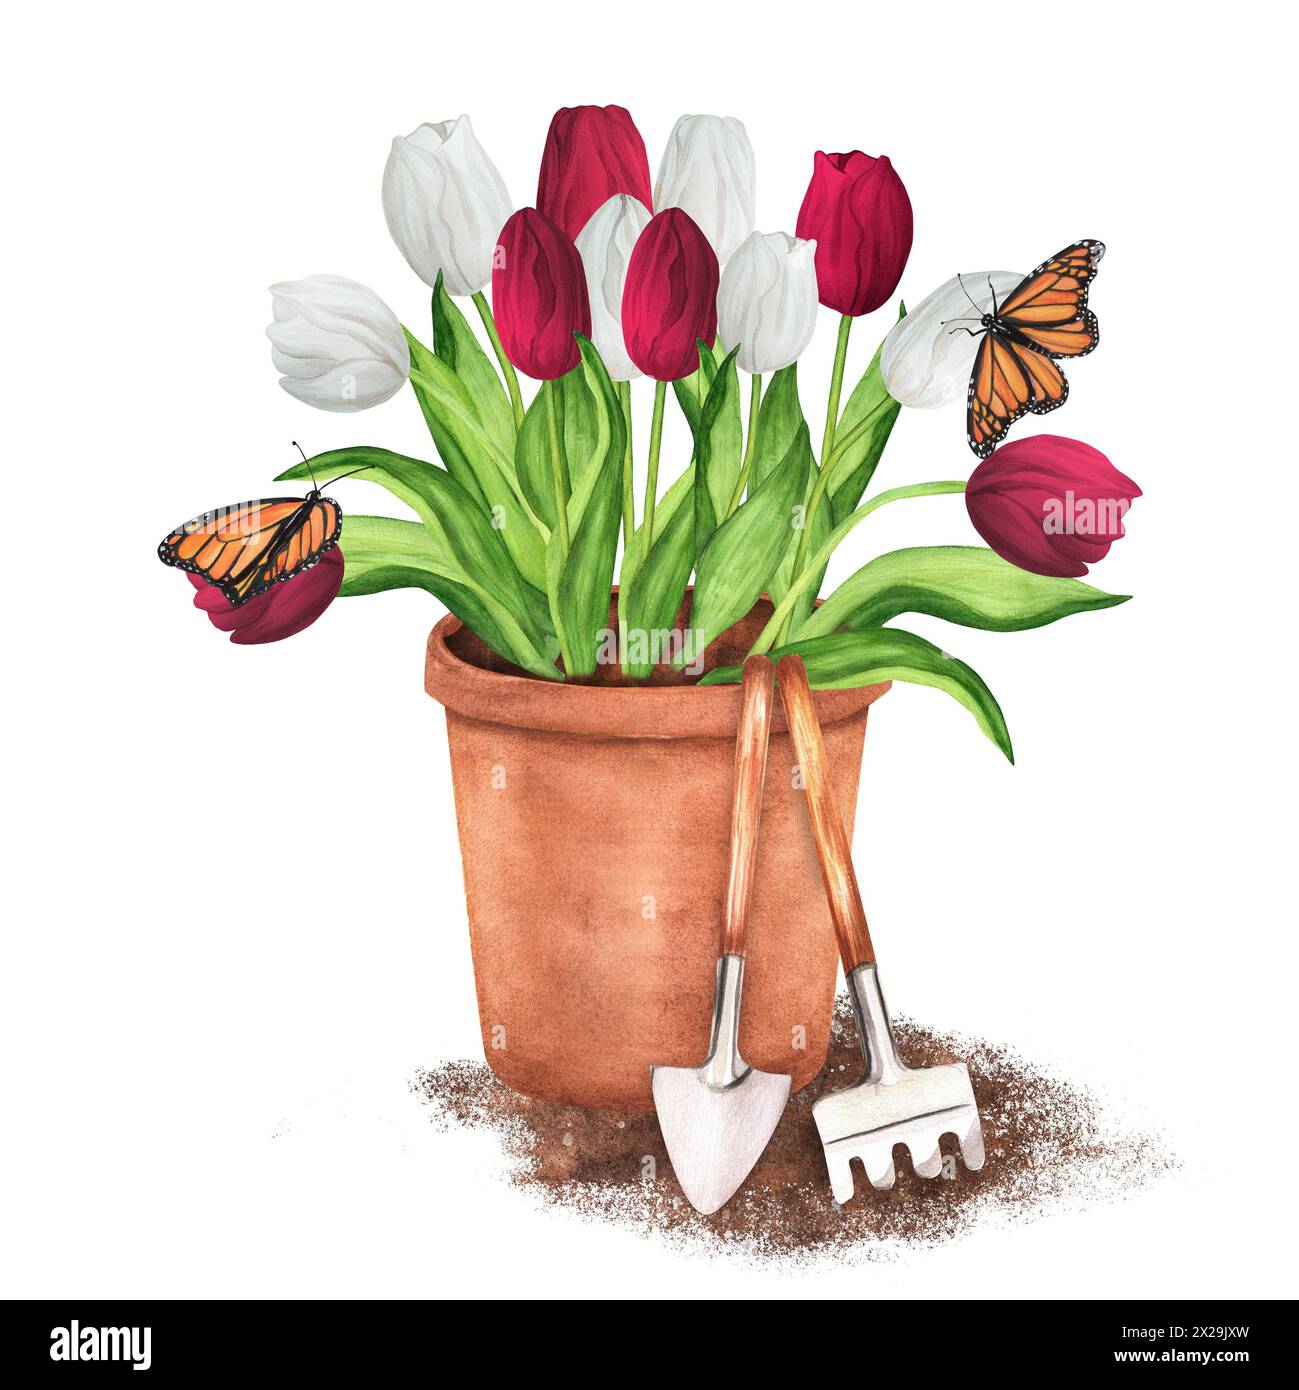 Hand-drawn watercolor illustration. Terracotta flowerpot with white and red tulips and butterflies. Garden pot with garden tools - rake and trowel Stock Photo